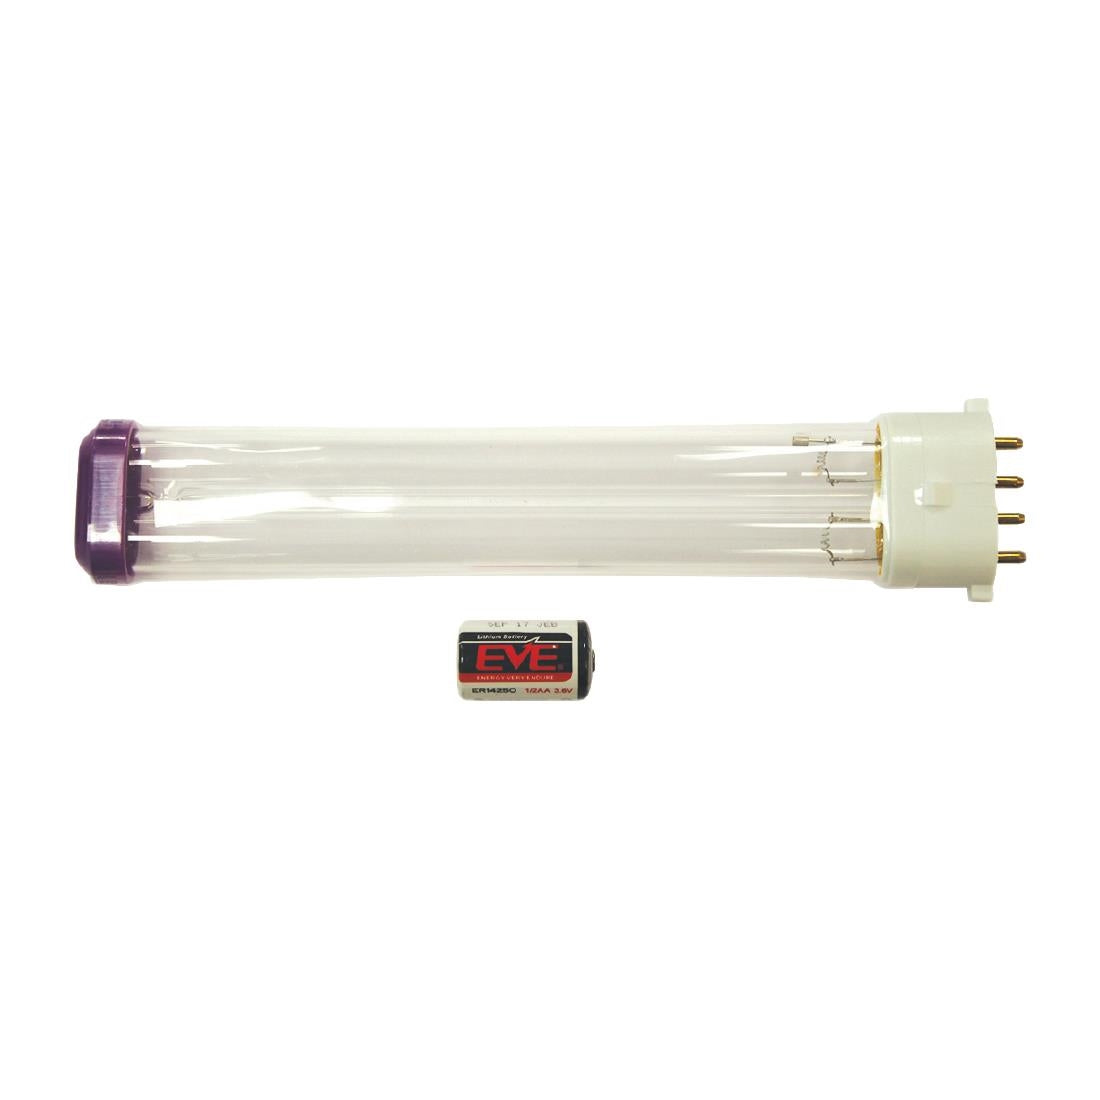 FE693 HyGenikx System Shatter-proof Replacement Lamp and Battery Purple Cap HGX-30-F JD Catering Equipment Solutions Ltd